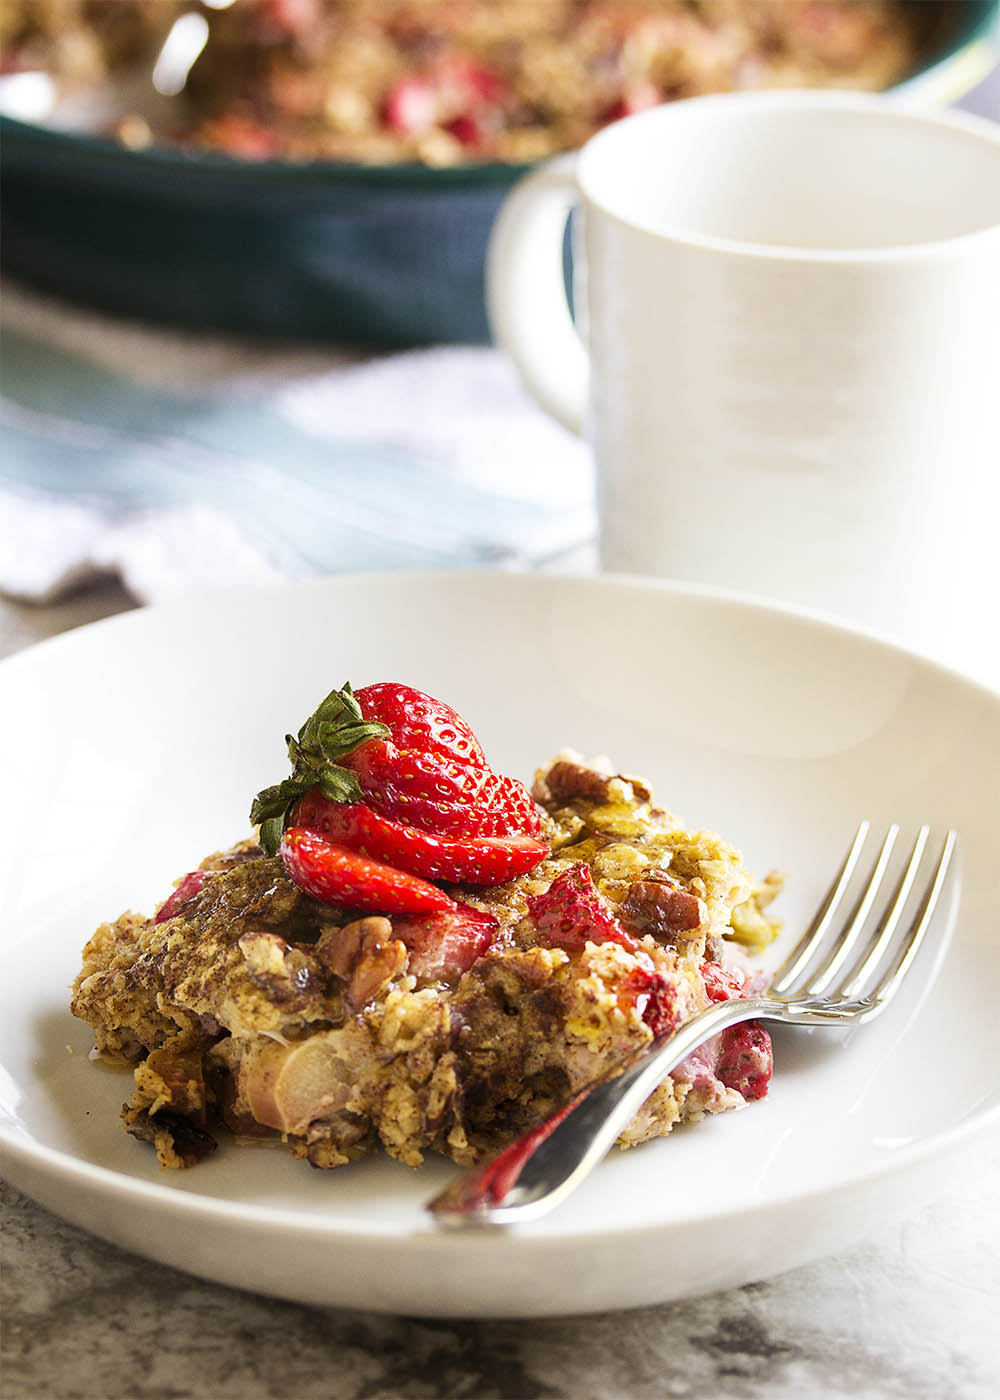 Strawberry Rhubarb Baked Oatmeal - This baked oatmeal smells like a cross between strawberry rhubarb pie and pancakes as it bakes. And it tastes as wonderful as it smells! Pour a little cream over the top, spoon some yogurt next to it, or eat it as is. It's all good. | justalittlebitofbacon.com